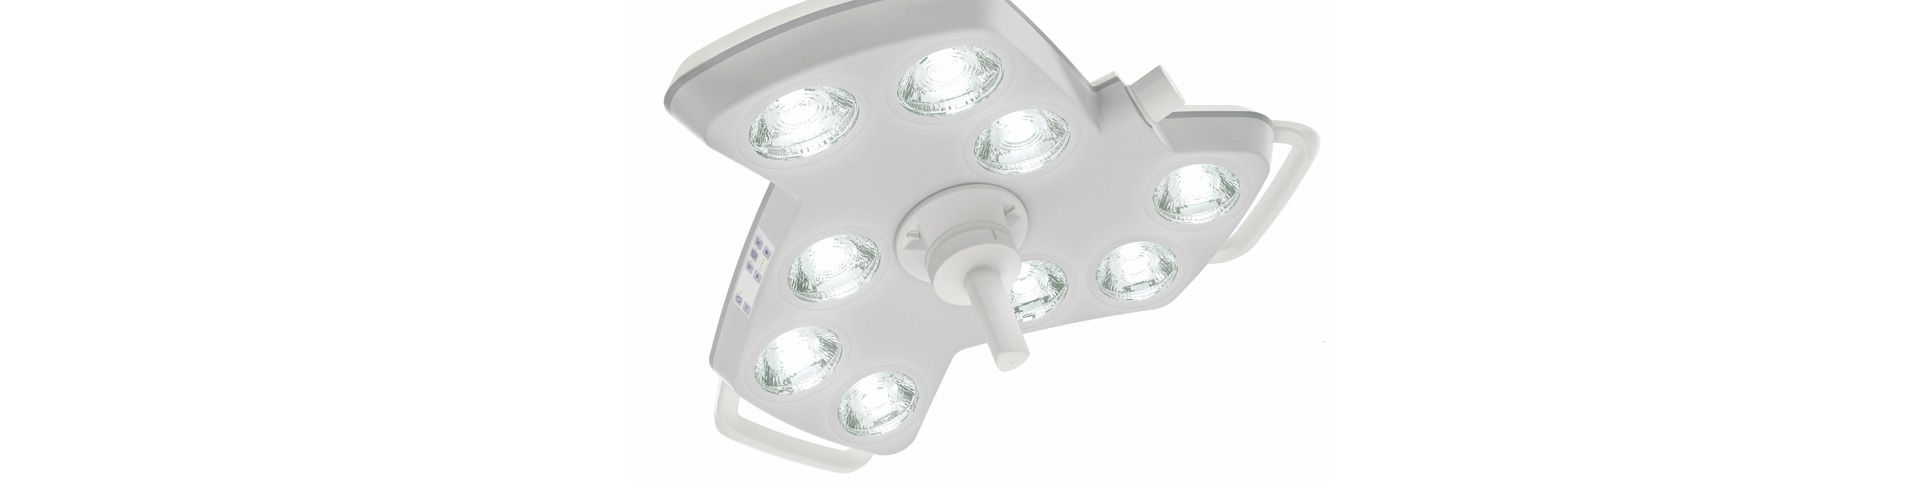 Operating lights - marLED E series